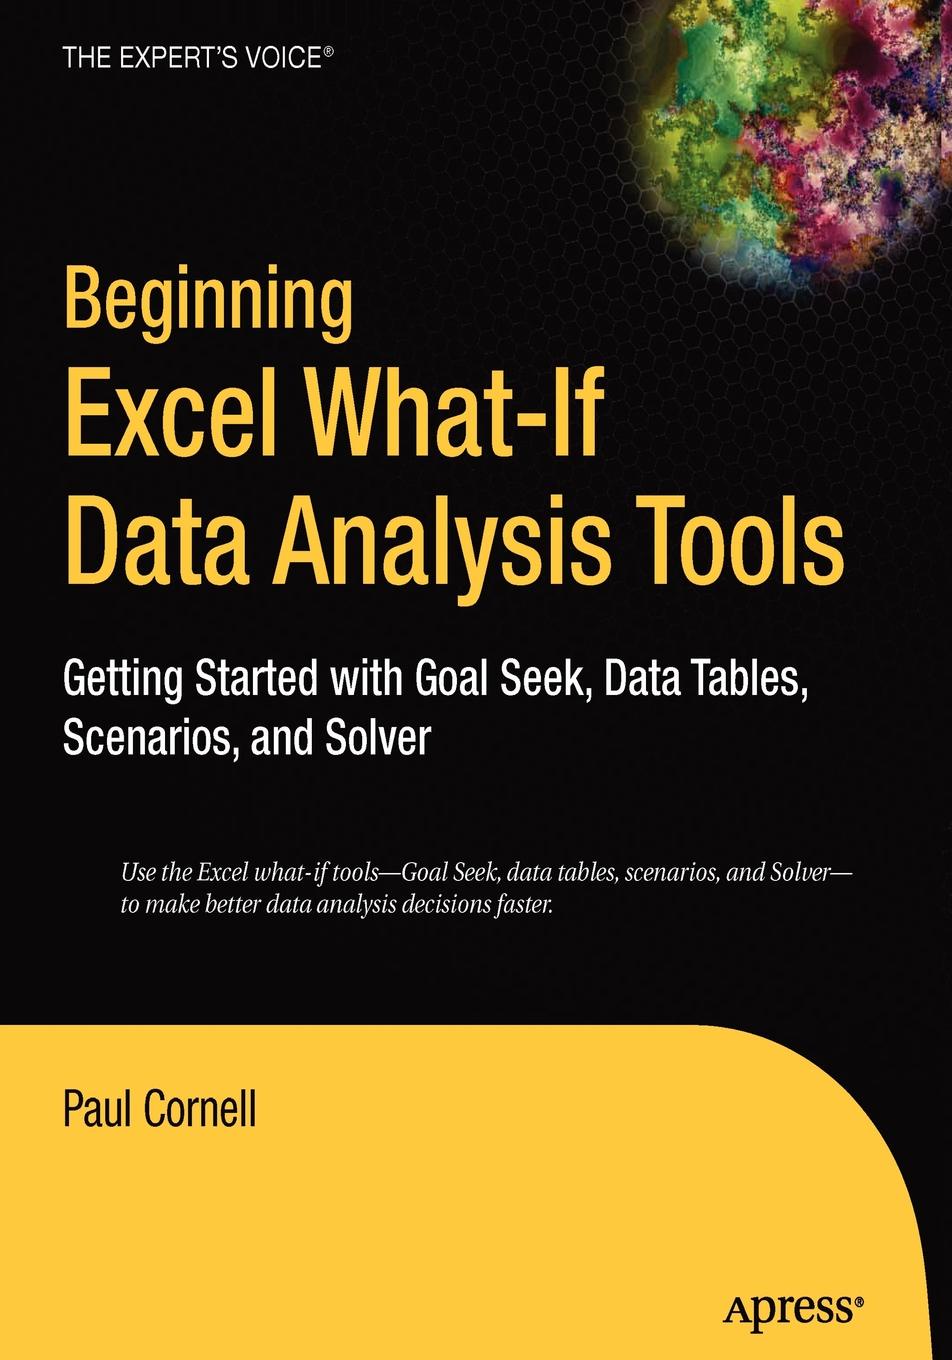 Beginning Excel What-If Data Analysis Tools. Getting Started with Goal Seek, Data Tables, Scenarios, and Solver